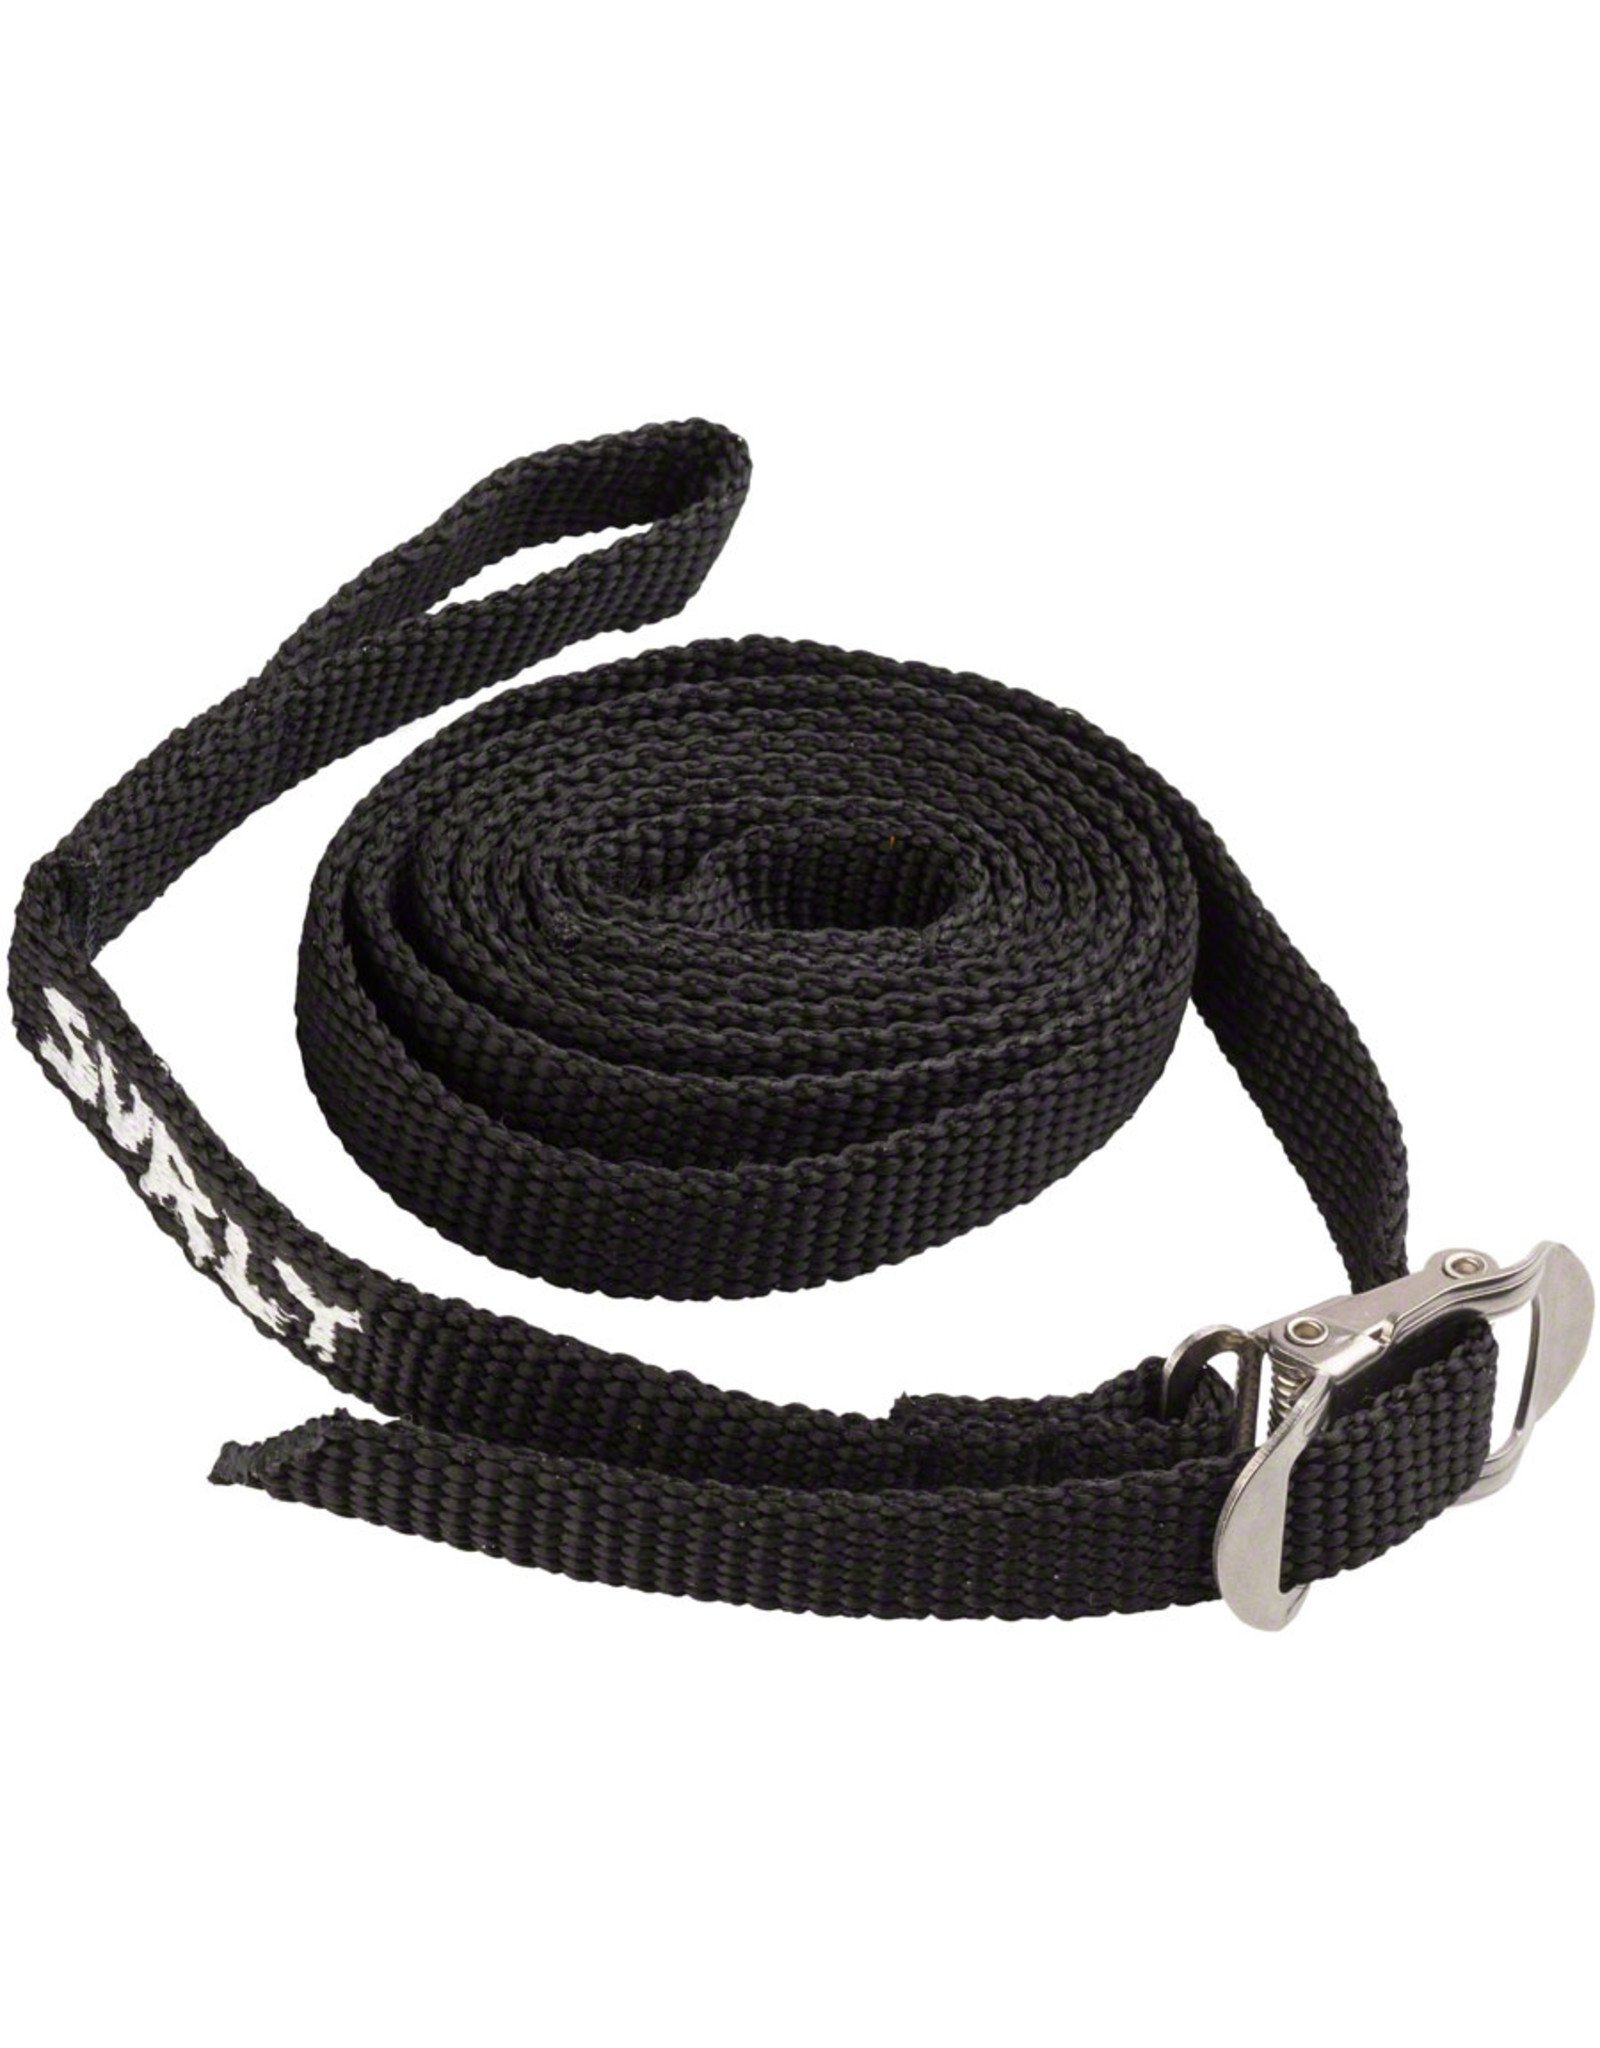 Surly Surly Loop Style Junk Strap